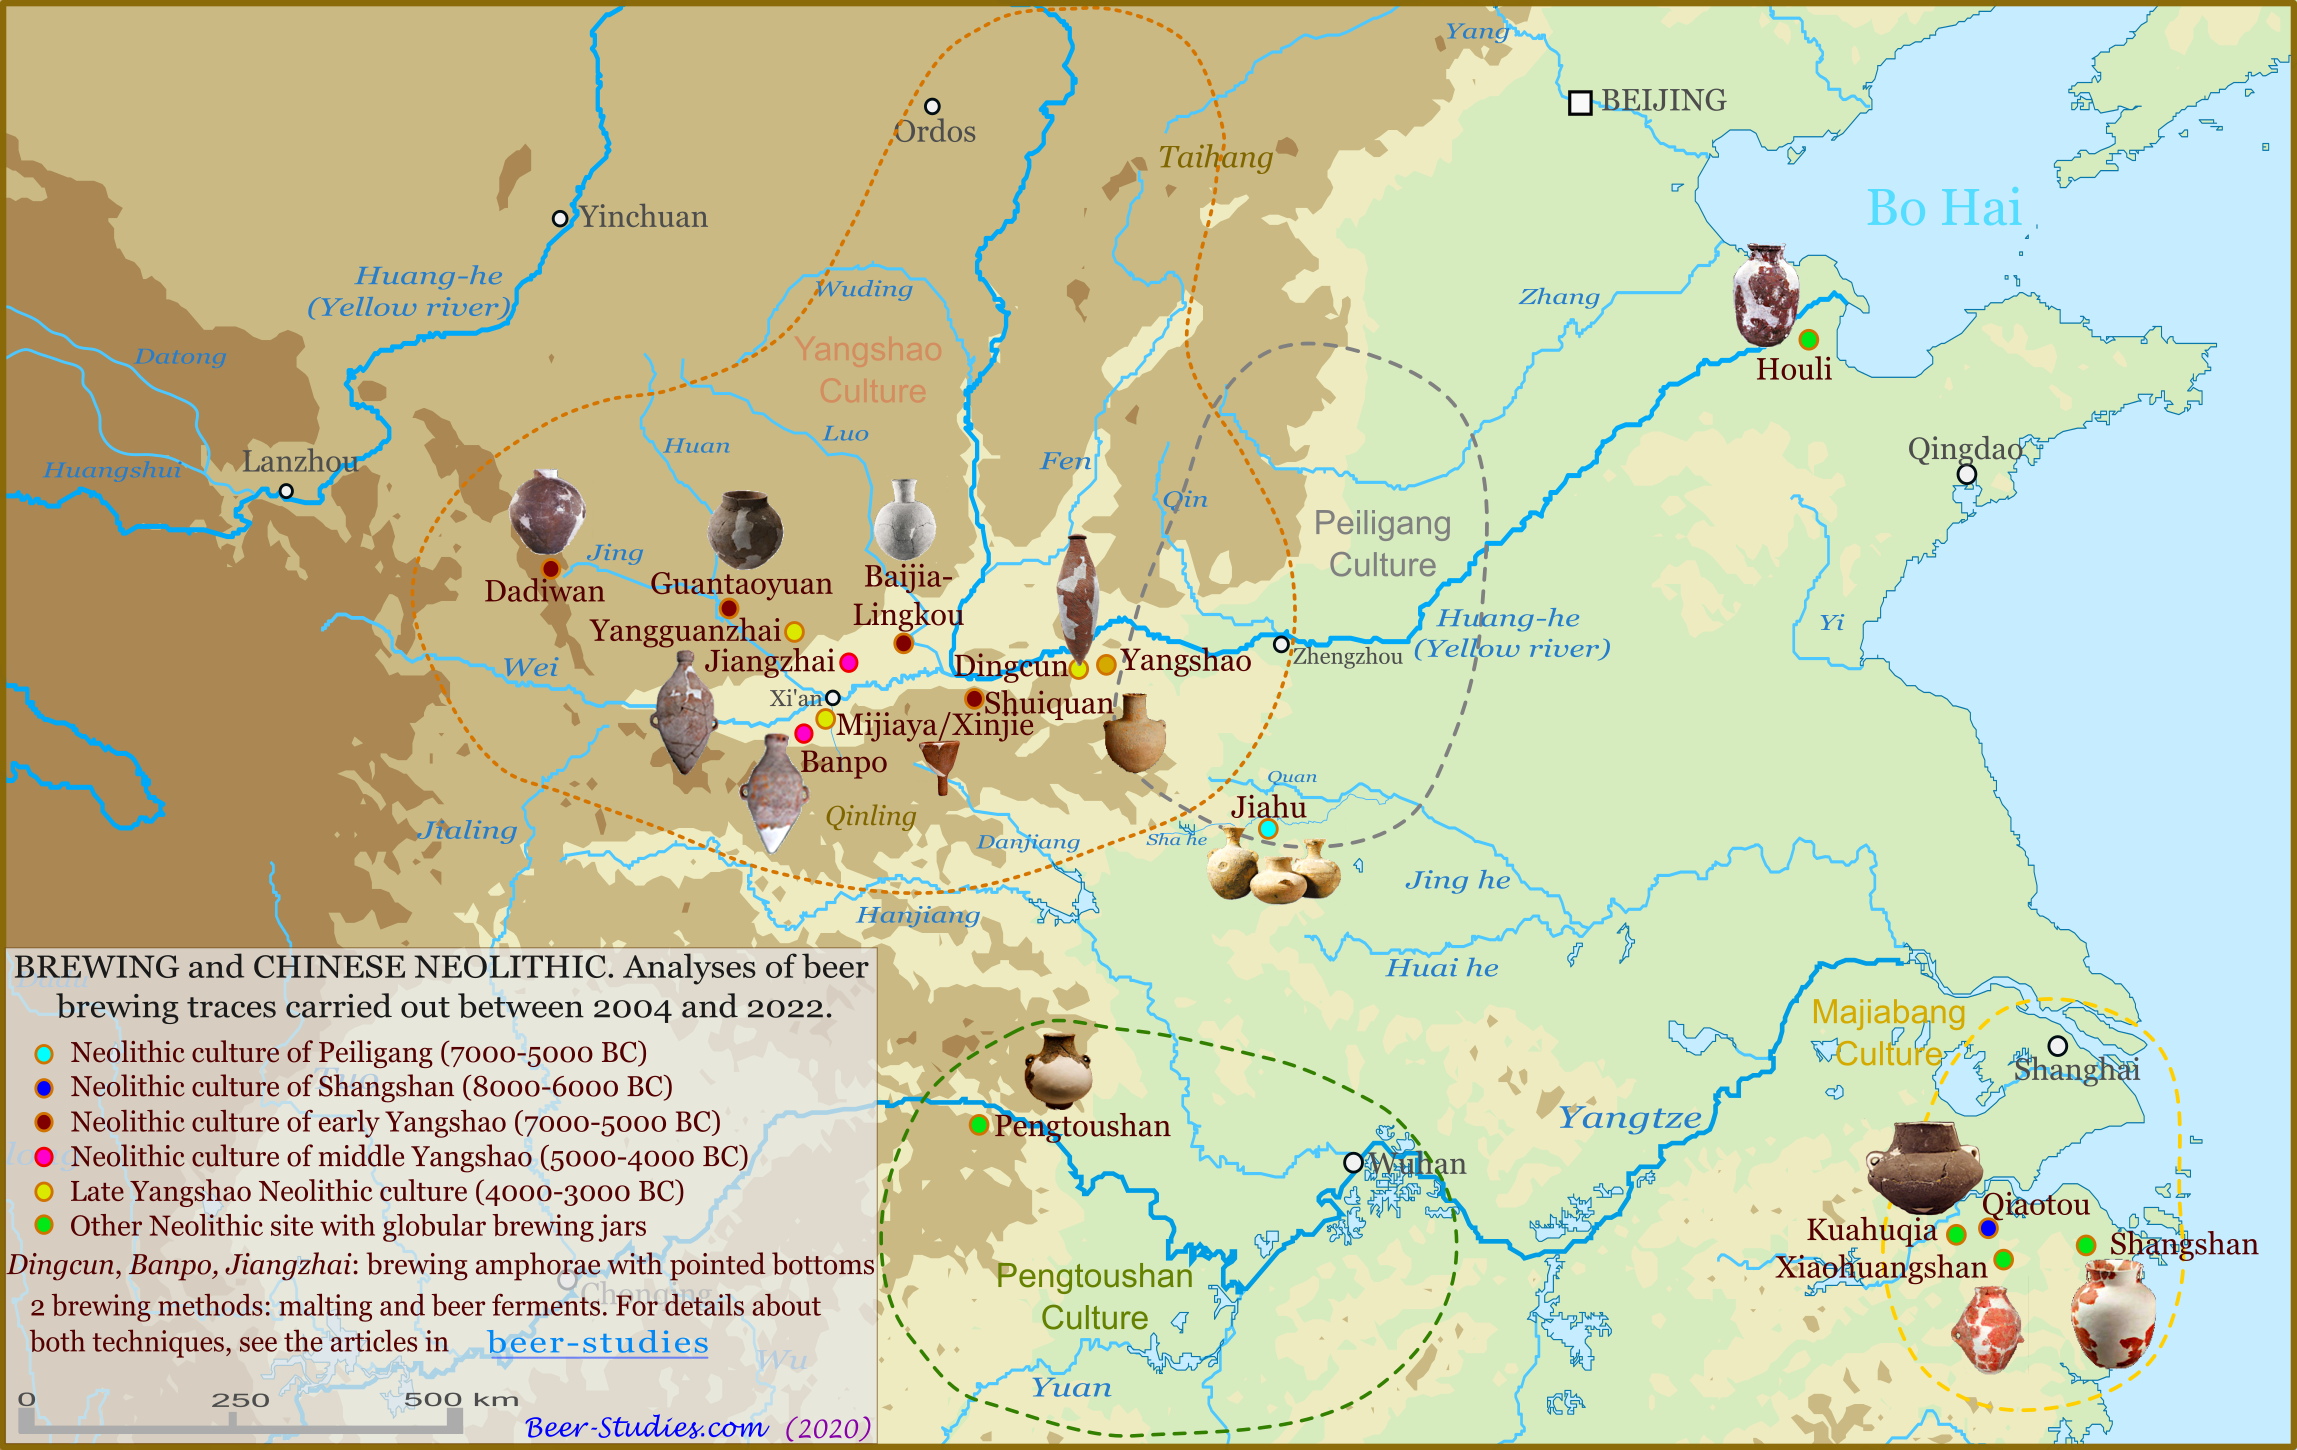 Jiahu localisation and neolithic sites related to the beer brewing in China. 